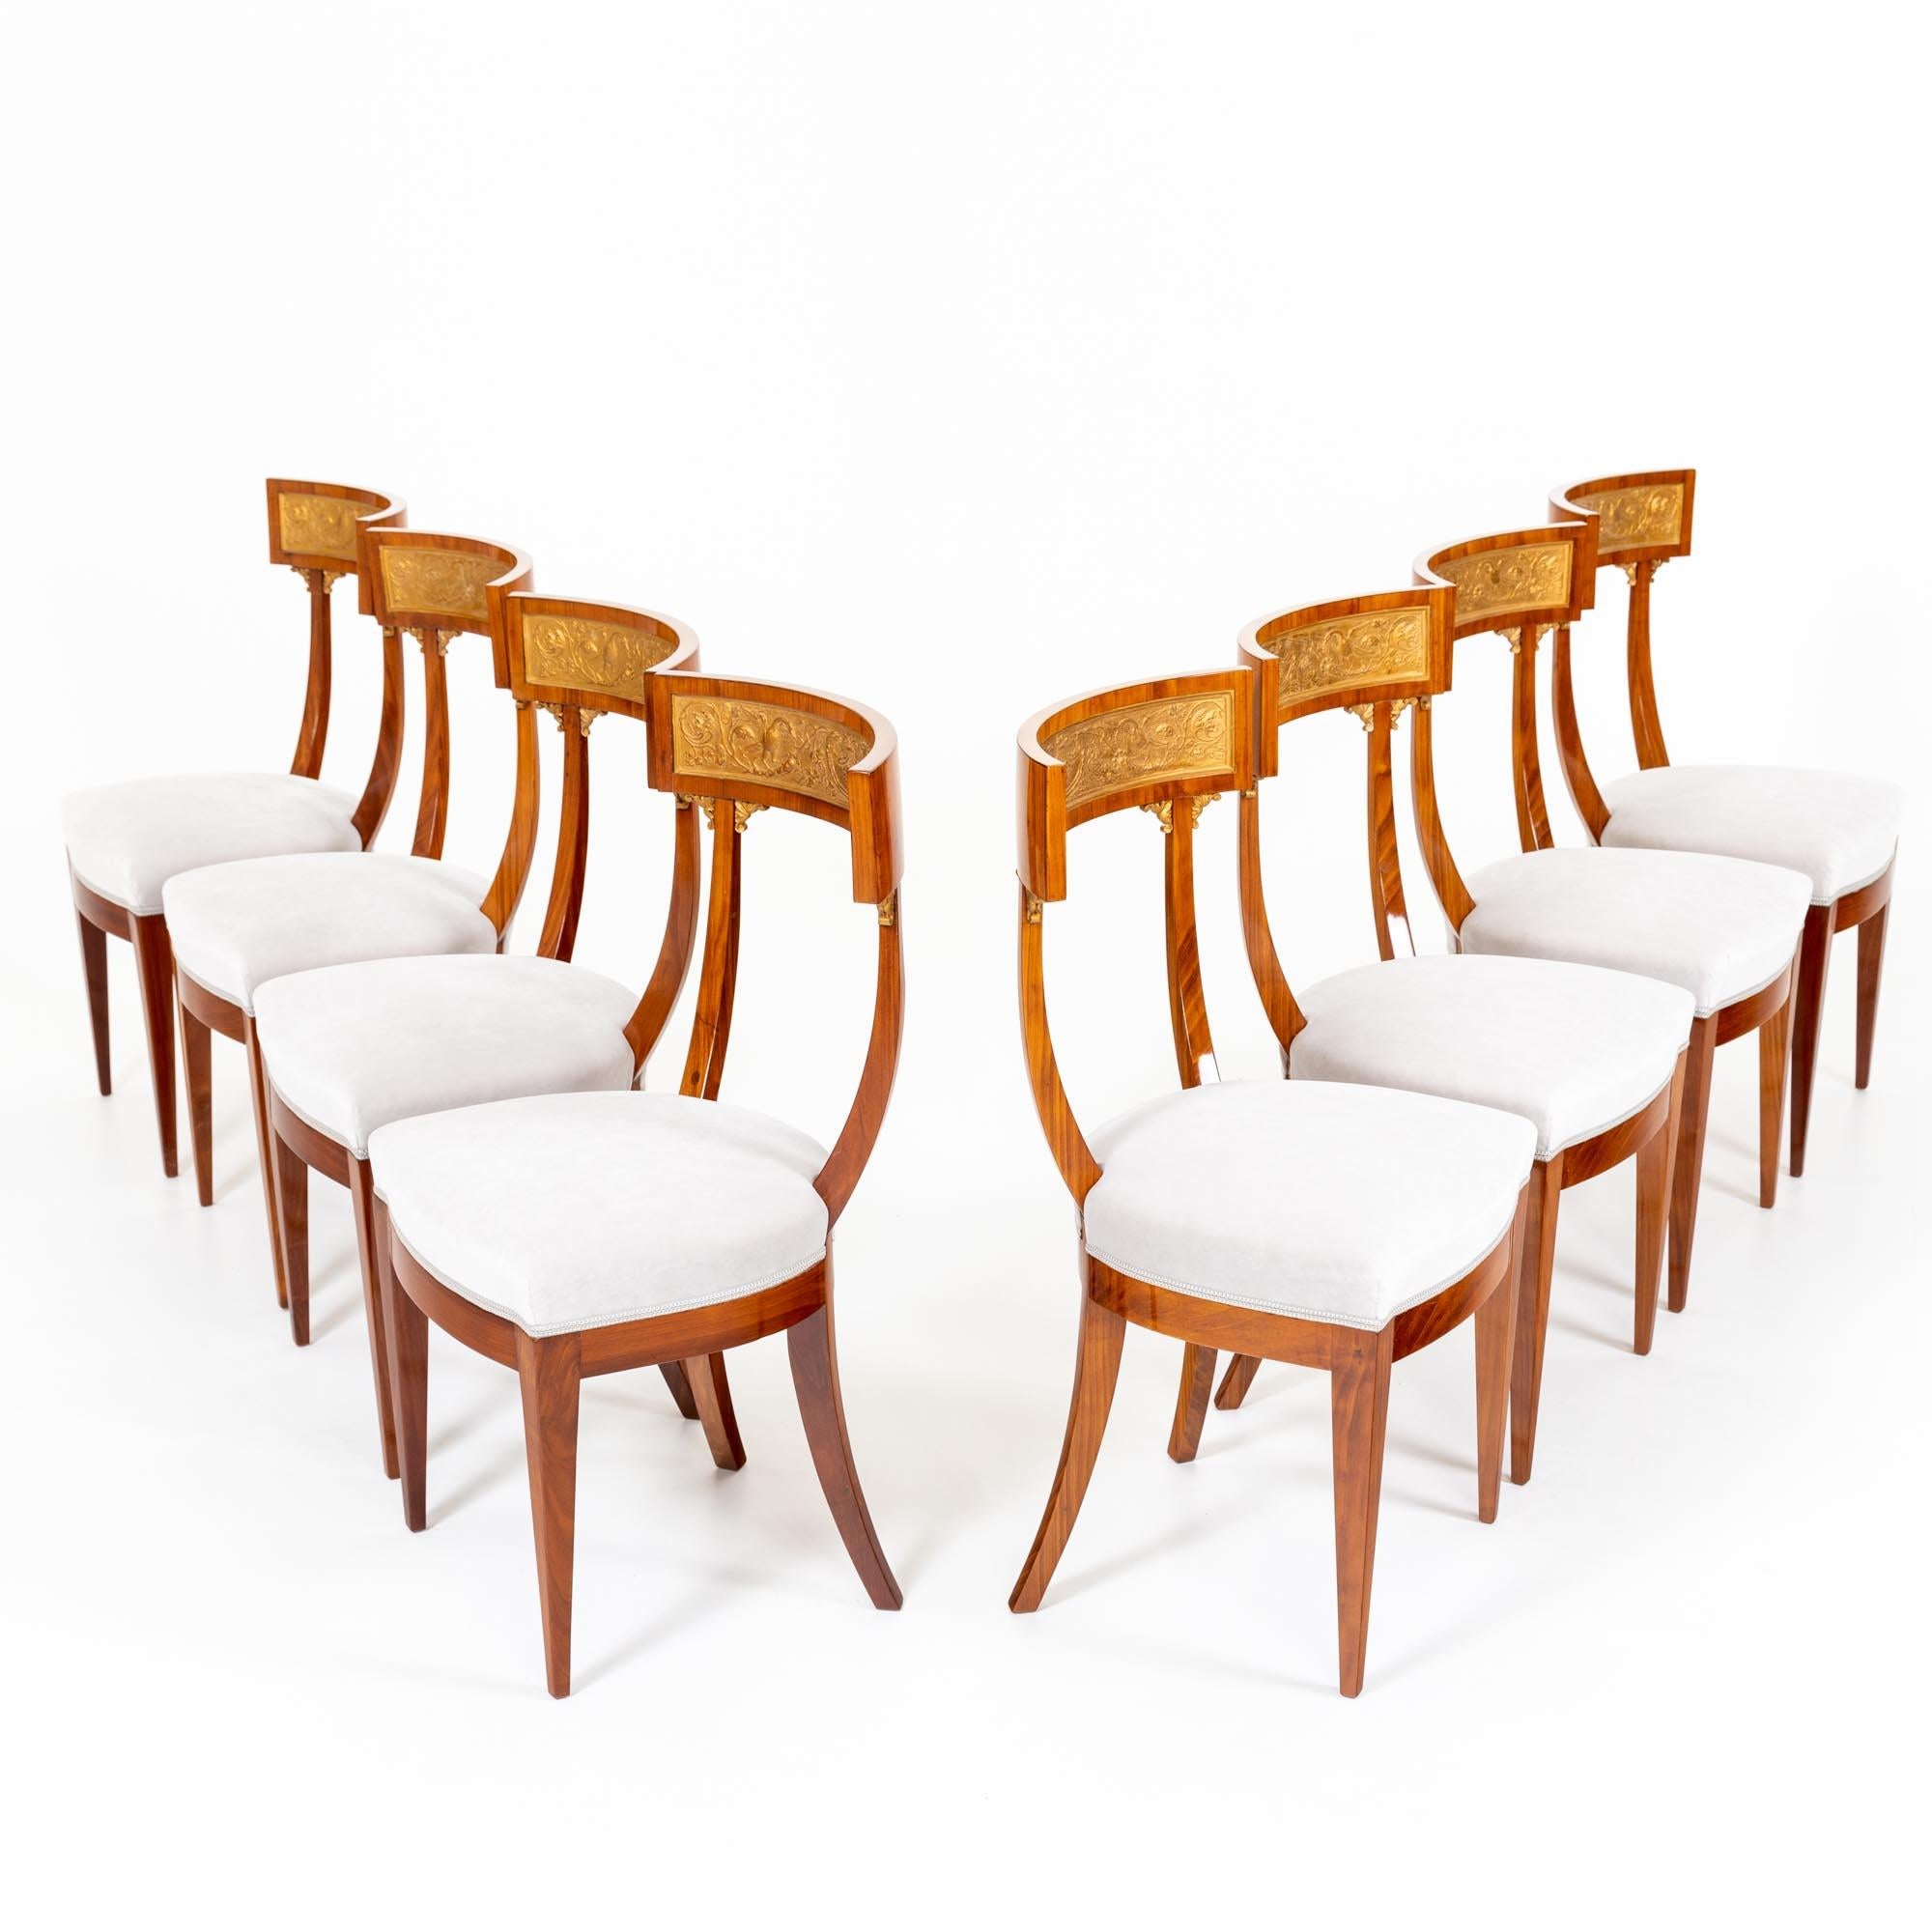 Italian Eight Neoclassical Dining Chairs in Cherry Wood, Tuscany, 19th Century For Sale